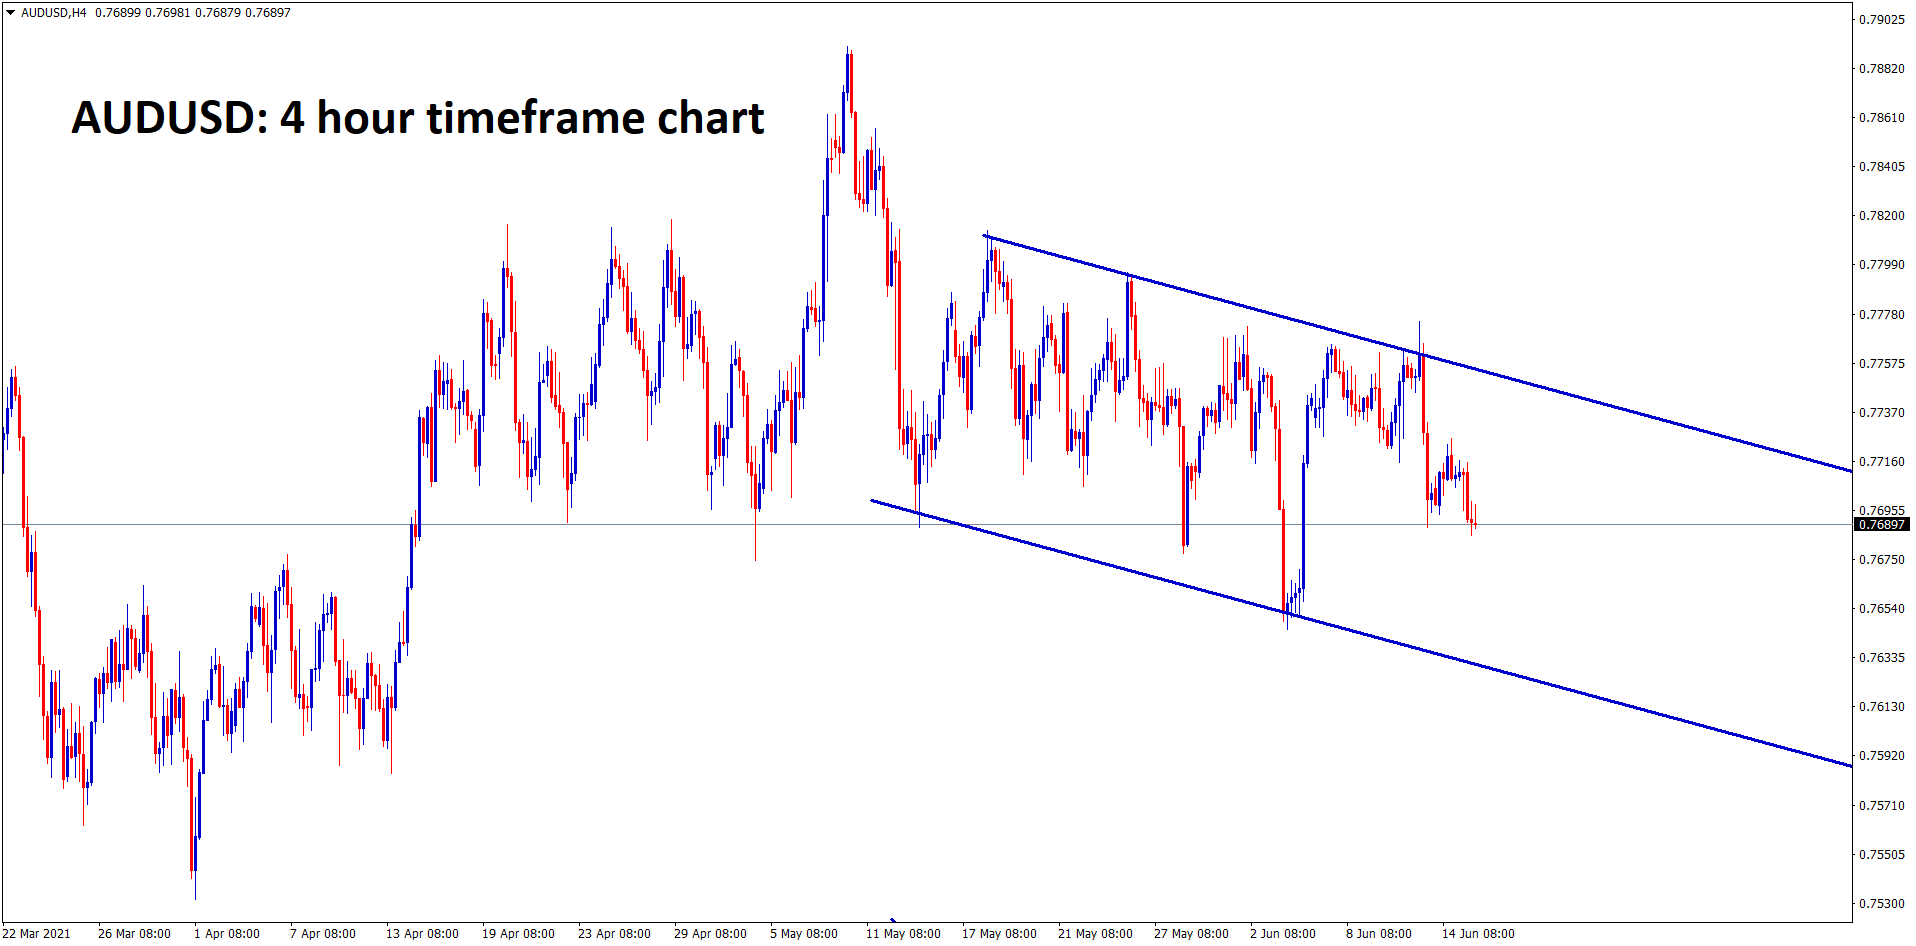 AUDUSD is moving in a descending channel ranges for a long time